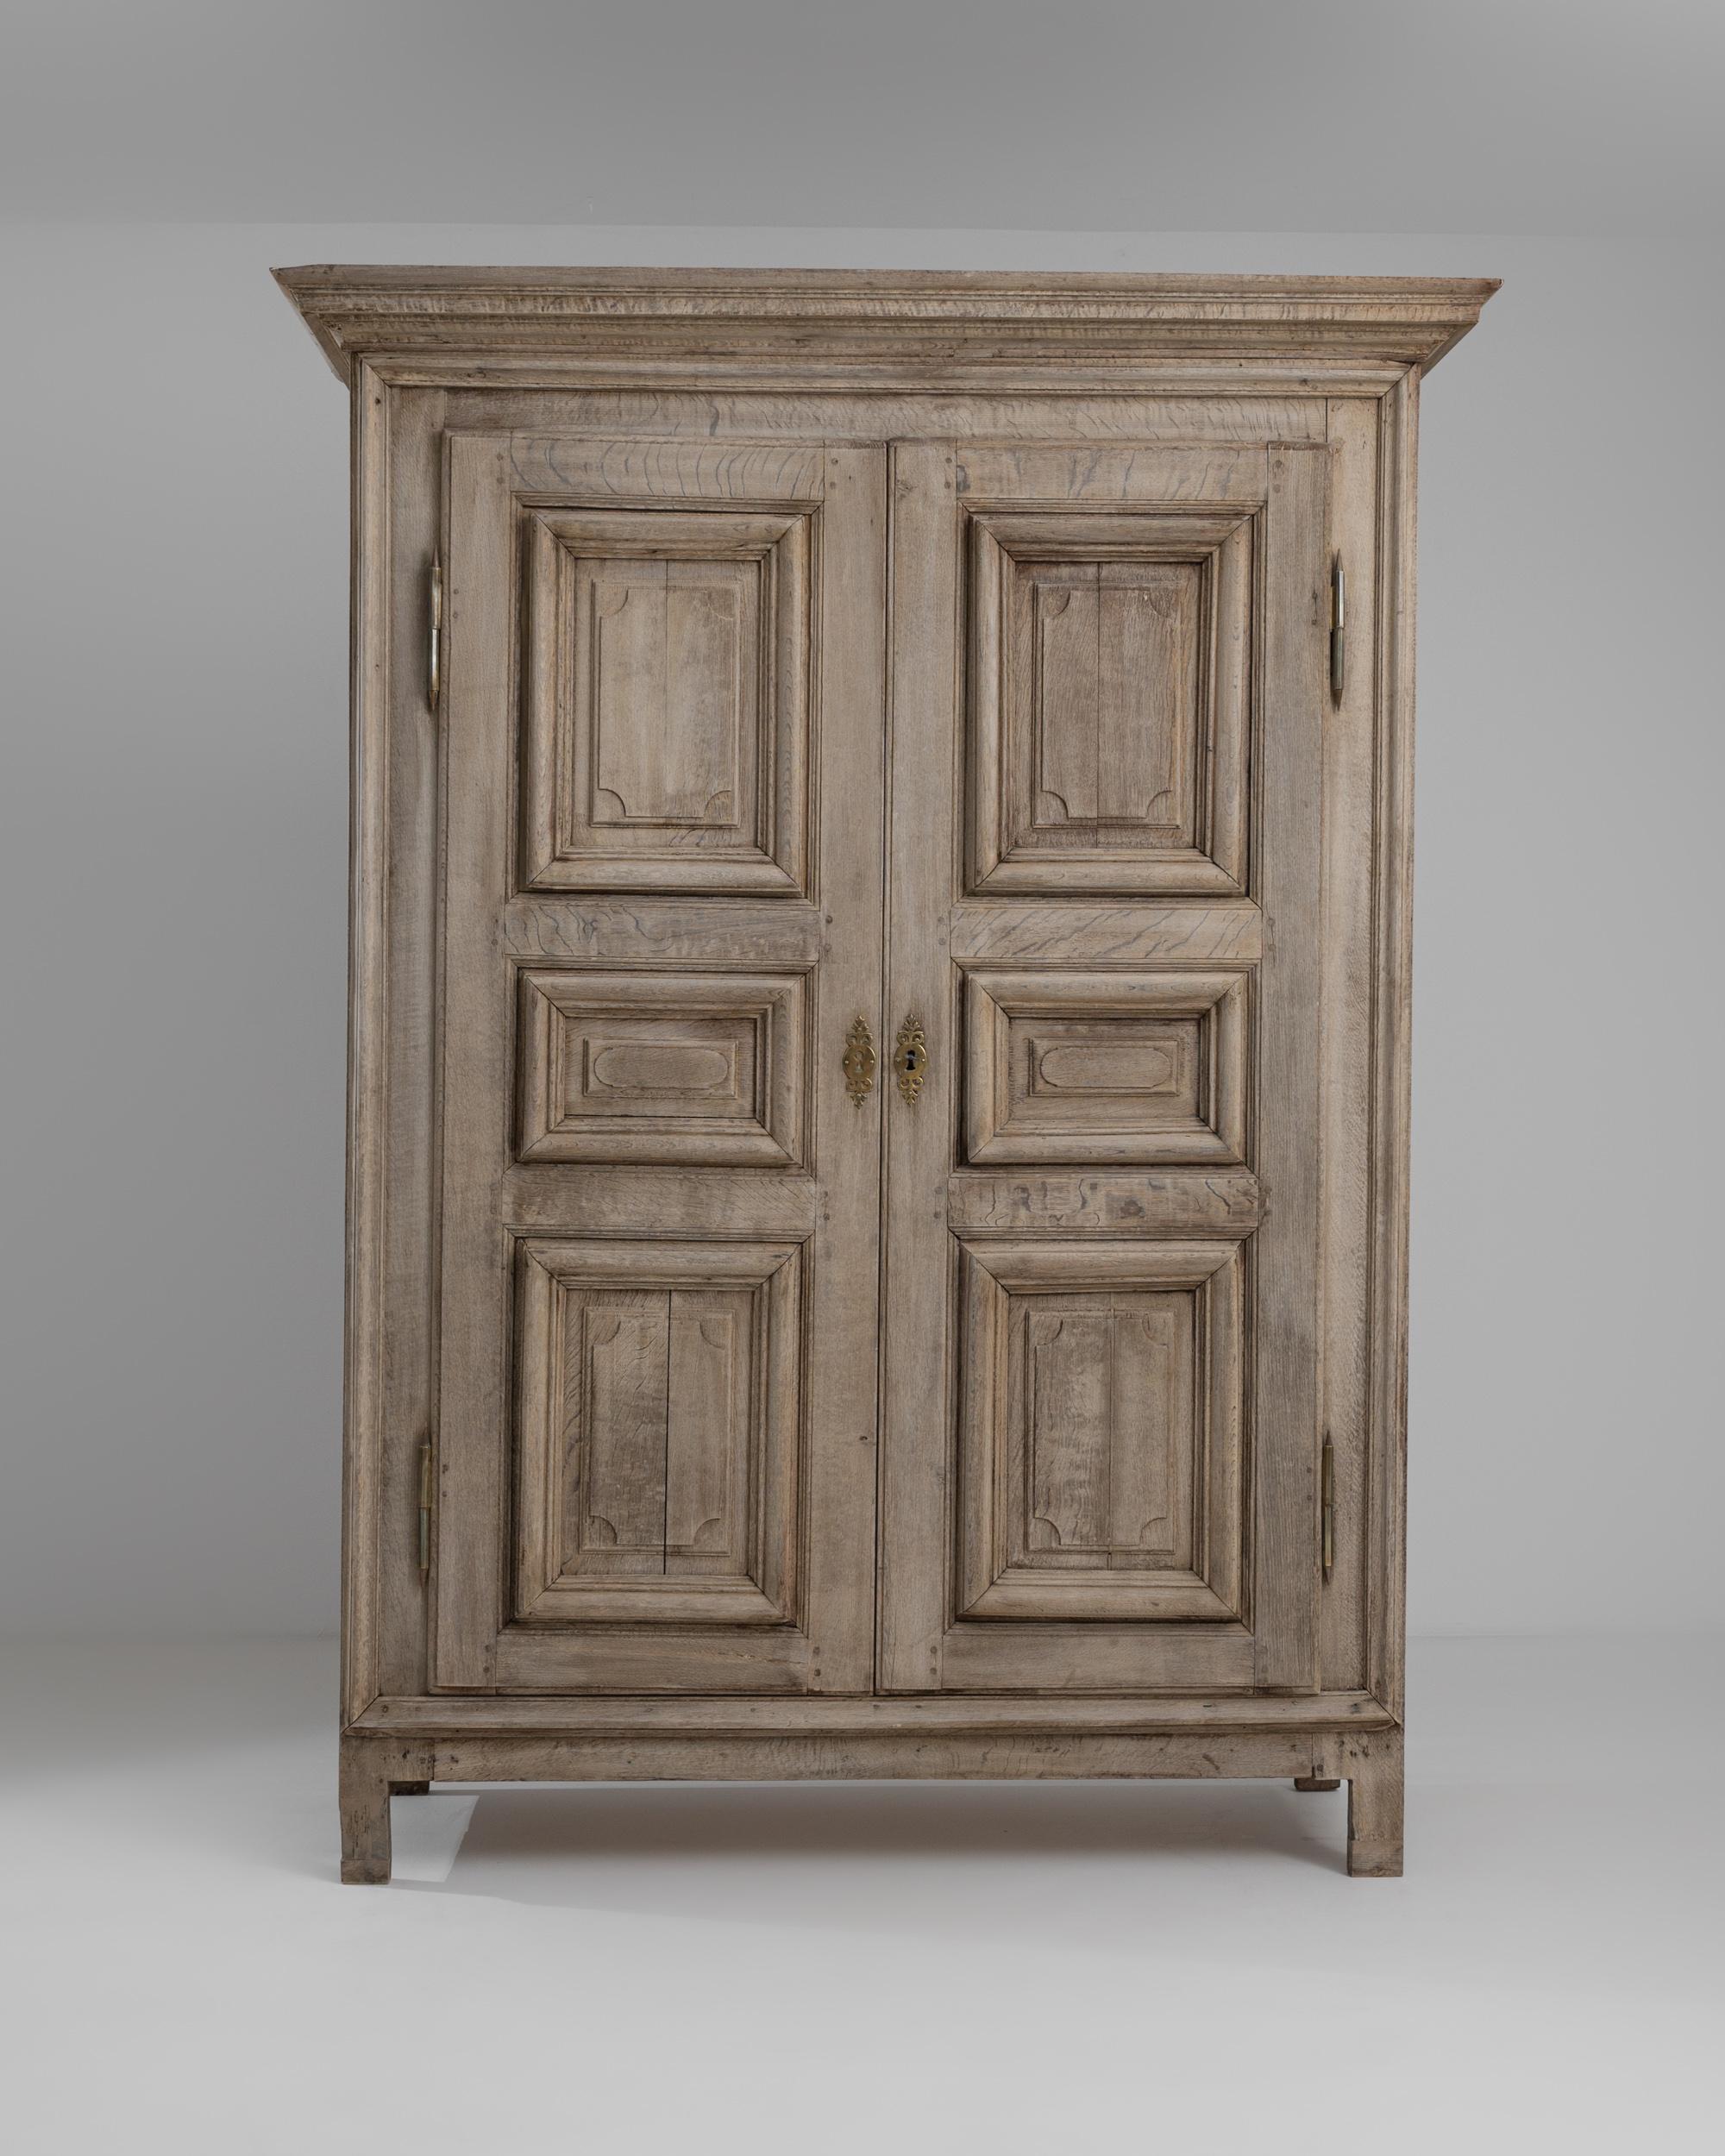 This handsome provincial armoire in natural oak makes a covetable find. Made in France in the 1700s, the bright, sunny tone of the carefully restored wood gives the cabinet a youthful character despite its years. Paneled doors open onto interior